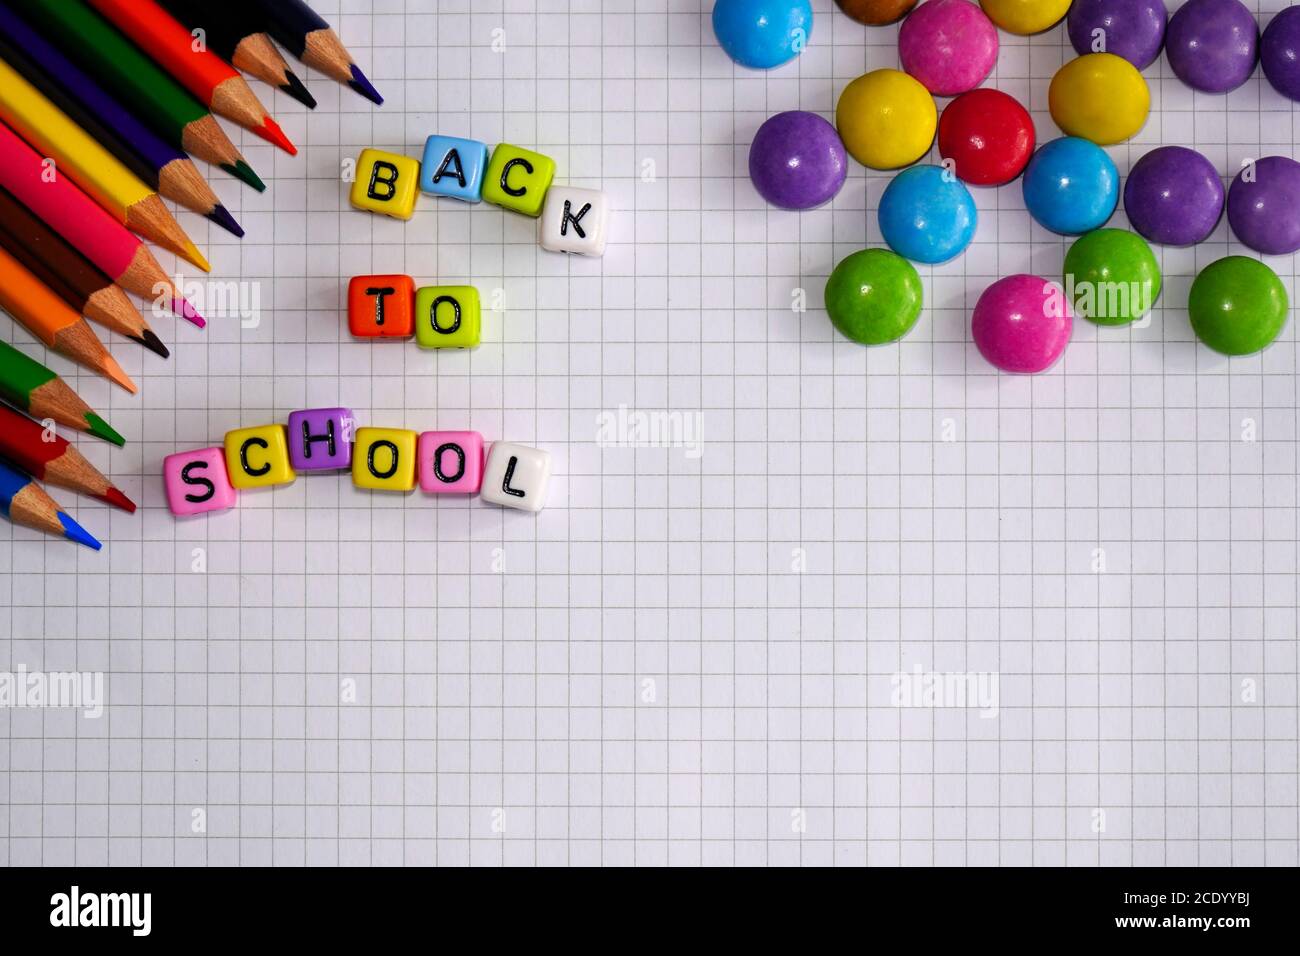 Cheerful 'Back to school' concept with colourful lettering on checked paper. Pencils and chocolate lentils for decoration. Stock Photo